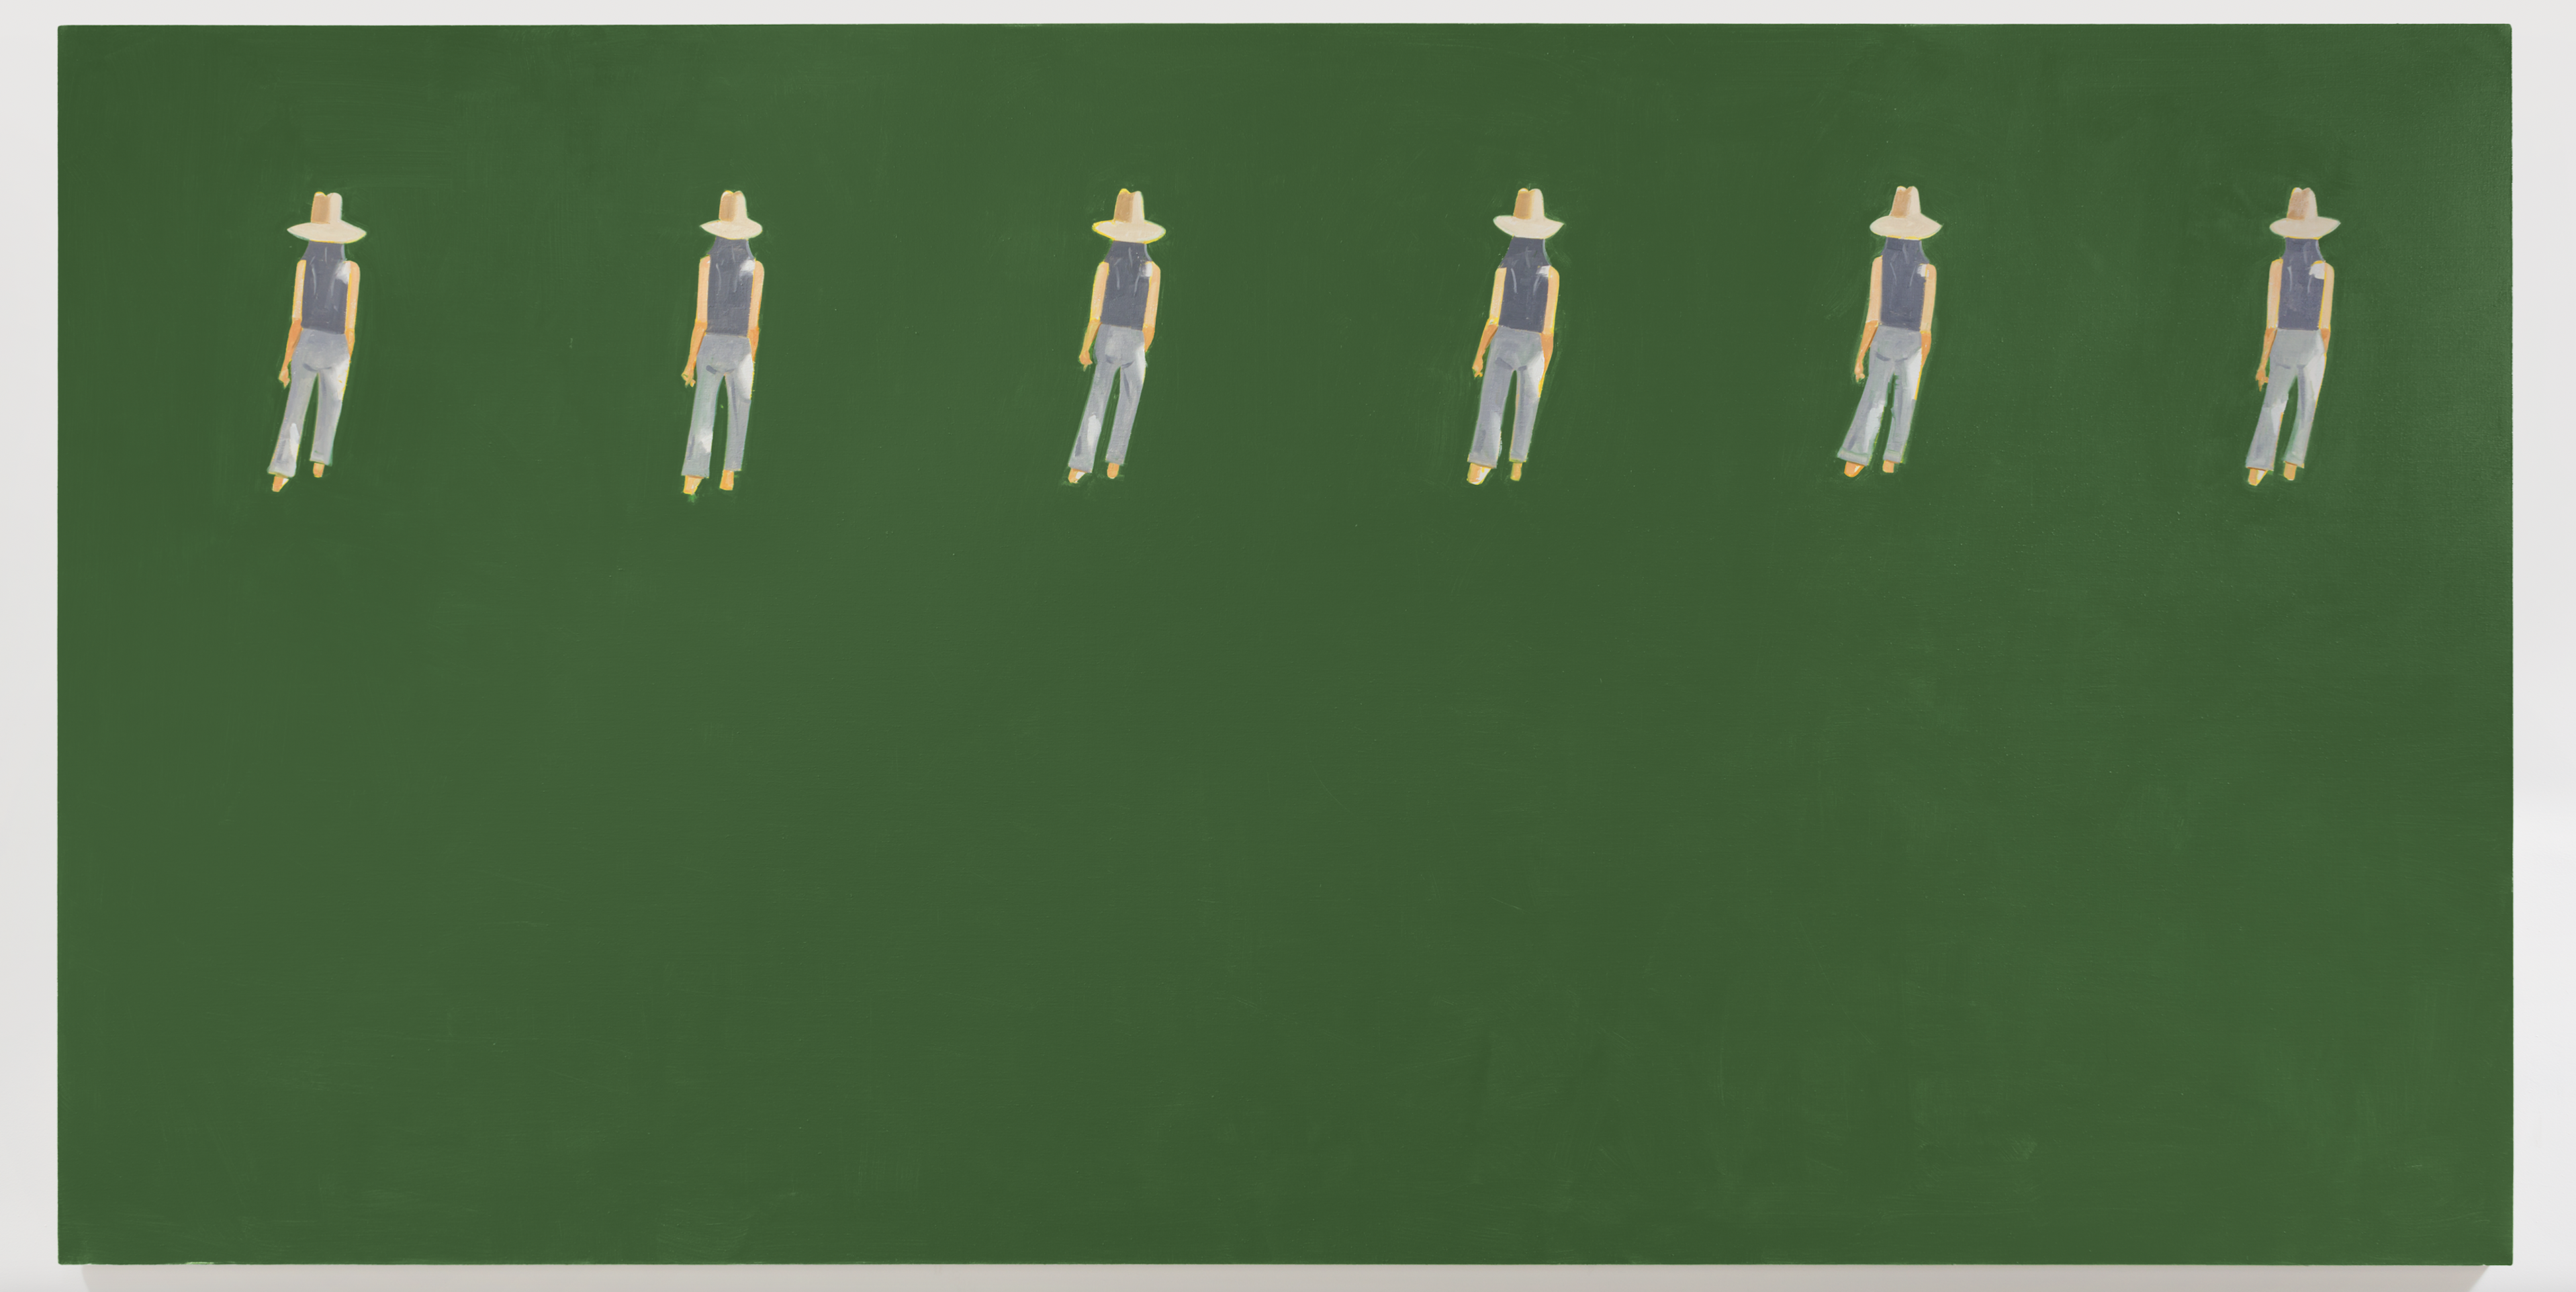 Alex Katz, ‘Departure (Ada),’ 2016. Oil on linen 72 by 144in. (182.9 by 365.8cm). Collection of Marguerite Steed Hoffman. © 2022 Alex Katz/Artist Rights Society (ARS), New York. Photo: Courtesy Collection of Marguerite Steed Hoffman